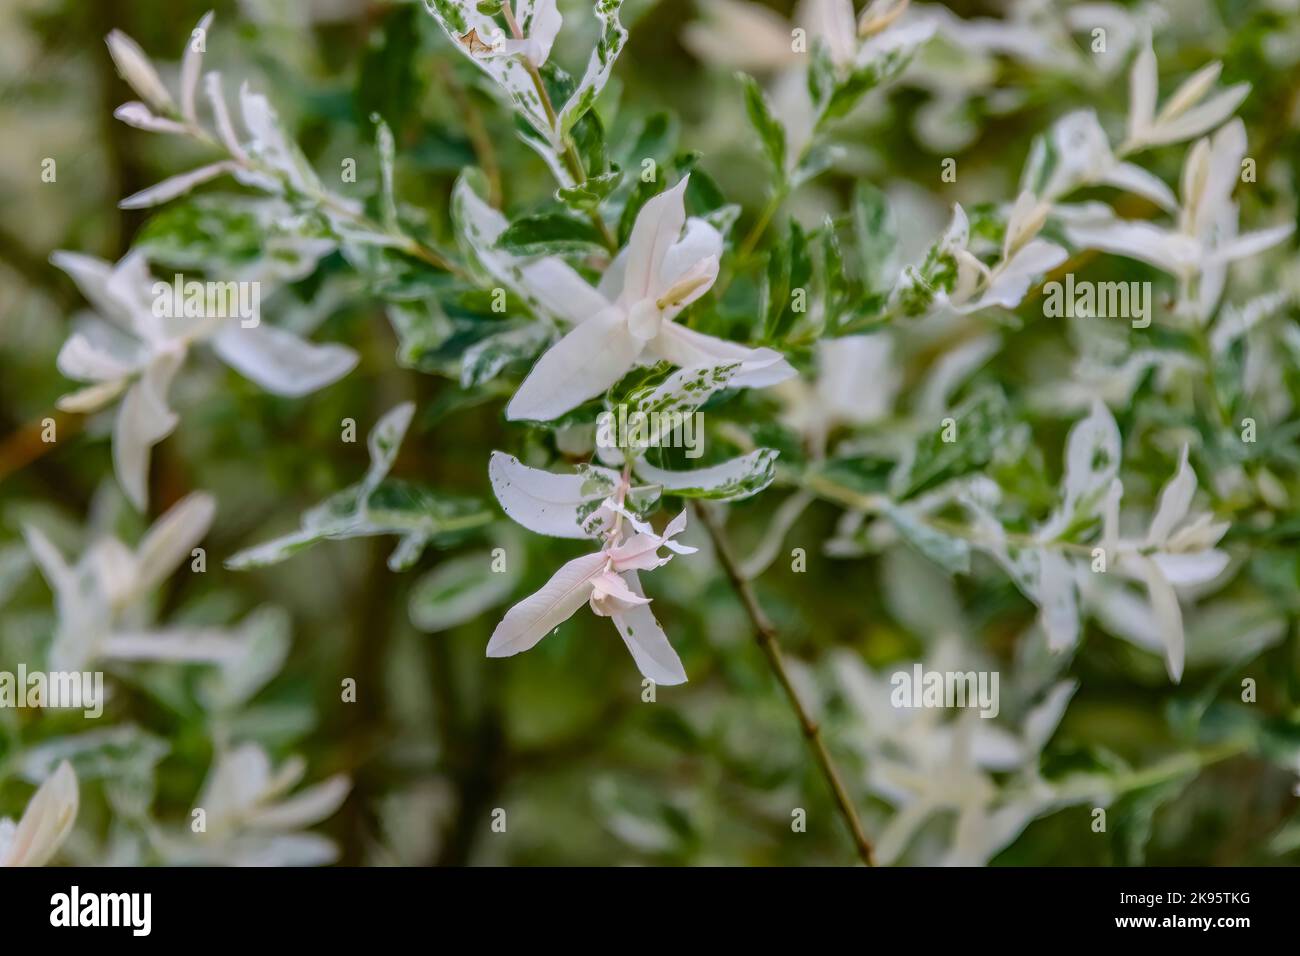 A closeup shot of Salix integra plant flowers with green leaves and white petals Stock Photo